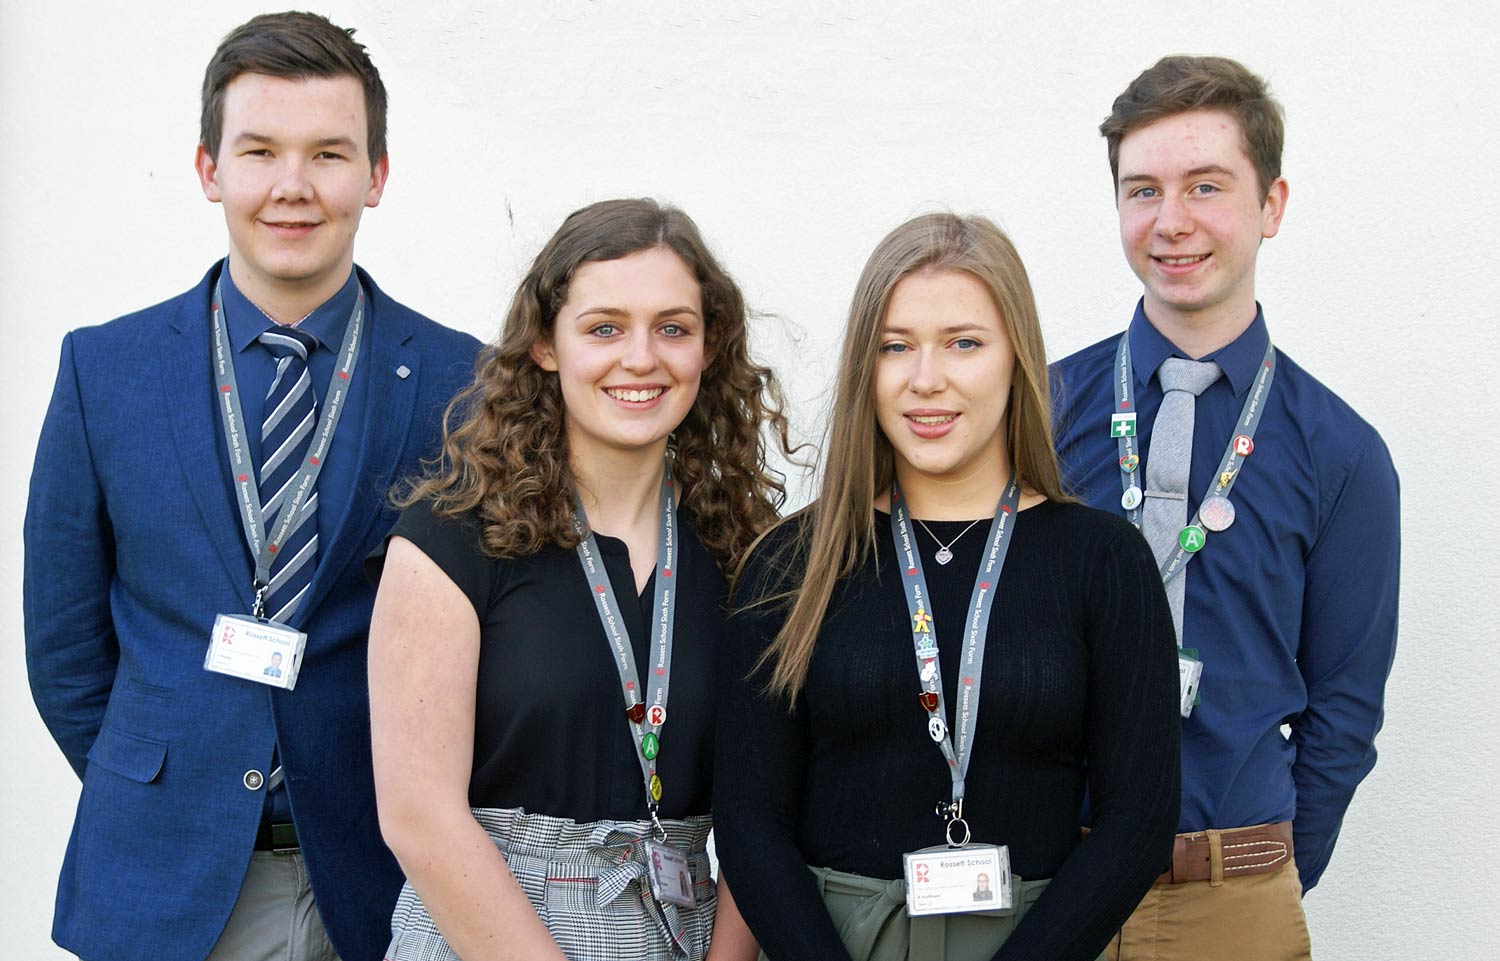 Head boy and girl James Porter and Lucy Hopkins have been elected by their fellow Sixth Formers at Rossett School and will be supported by deputies Kerry Holtham and Shaun Wilson